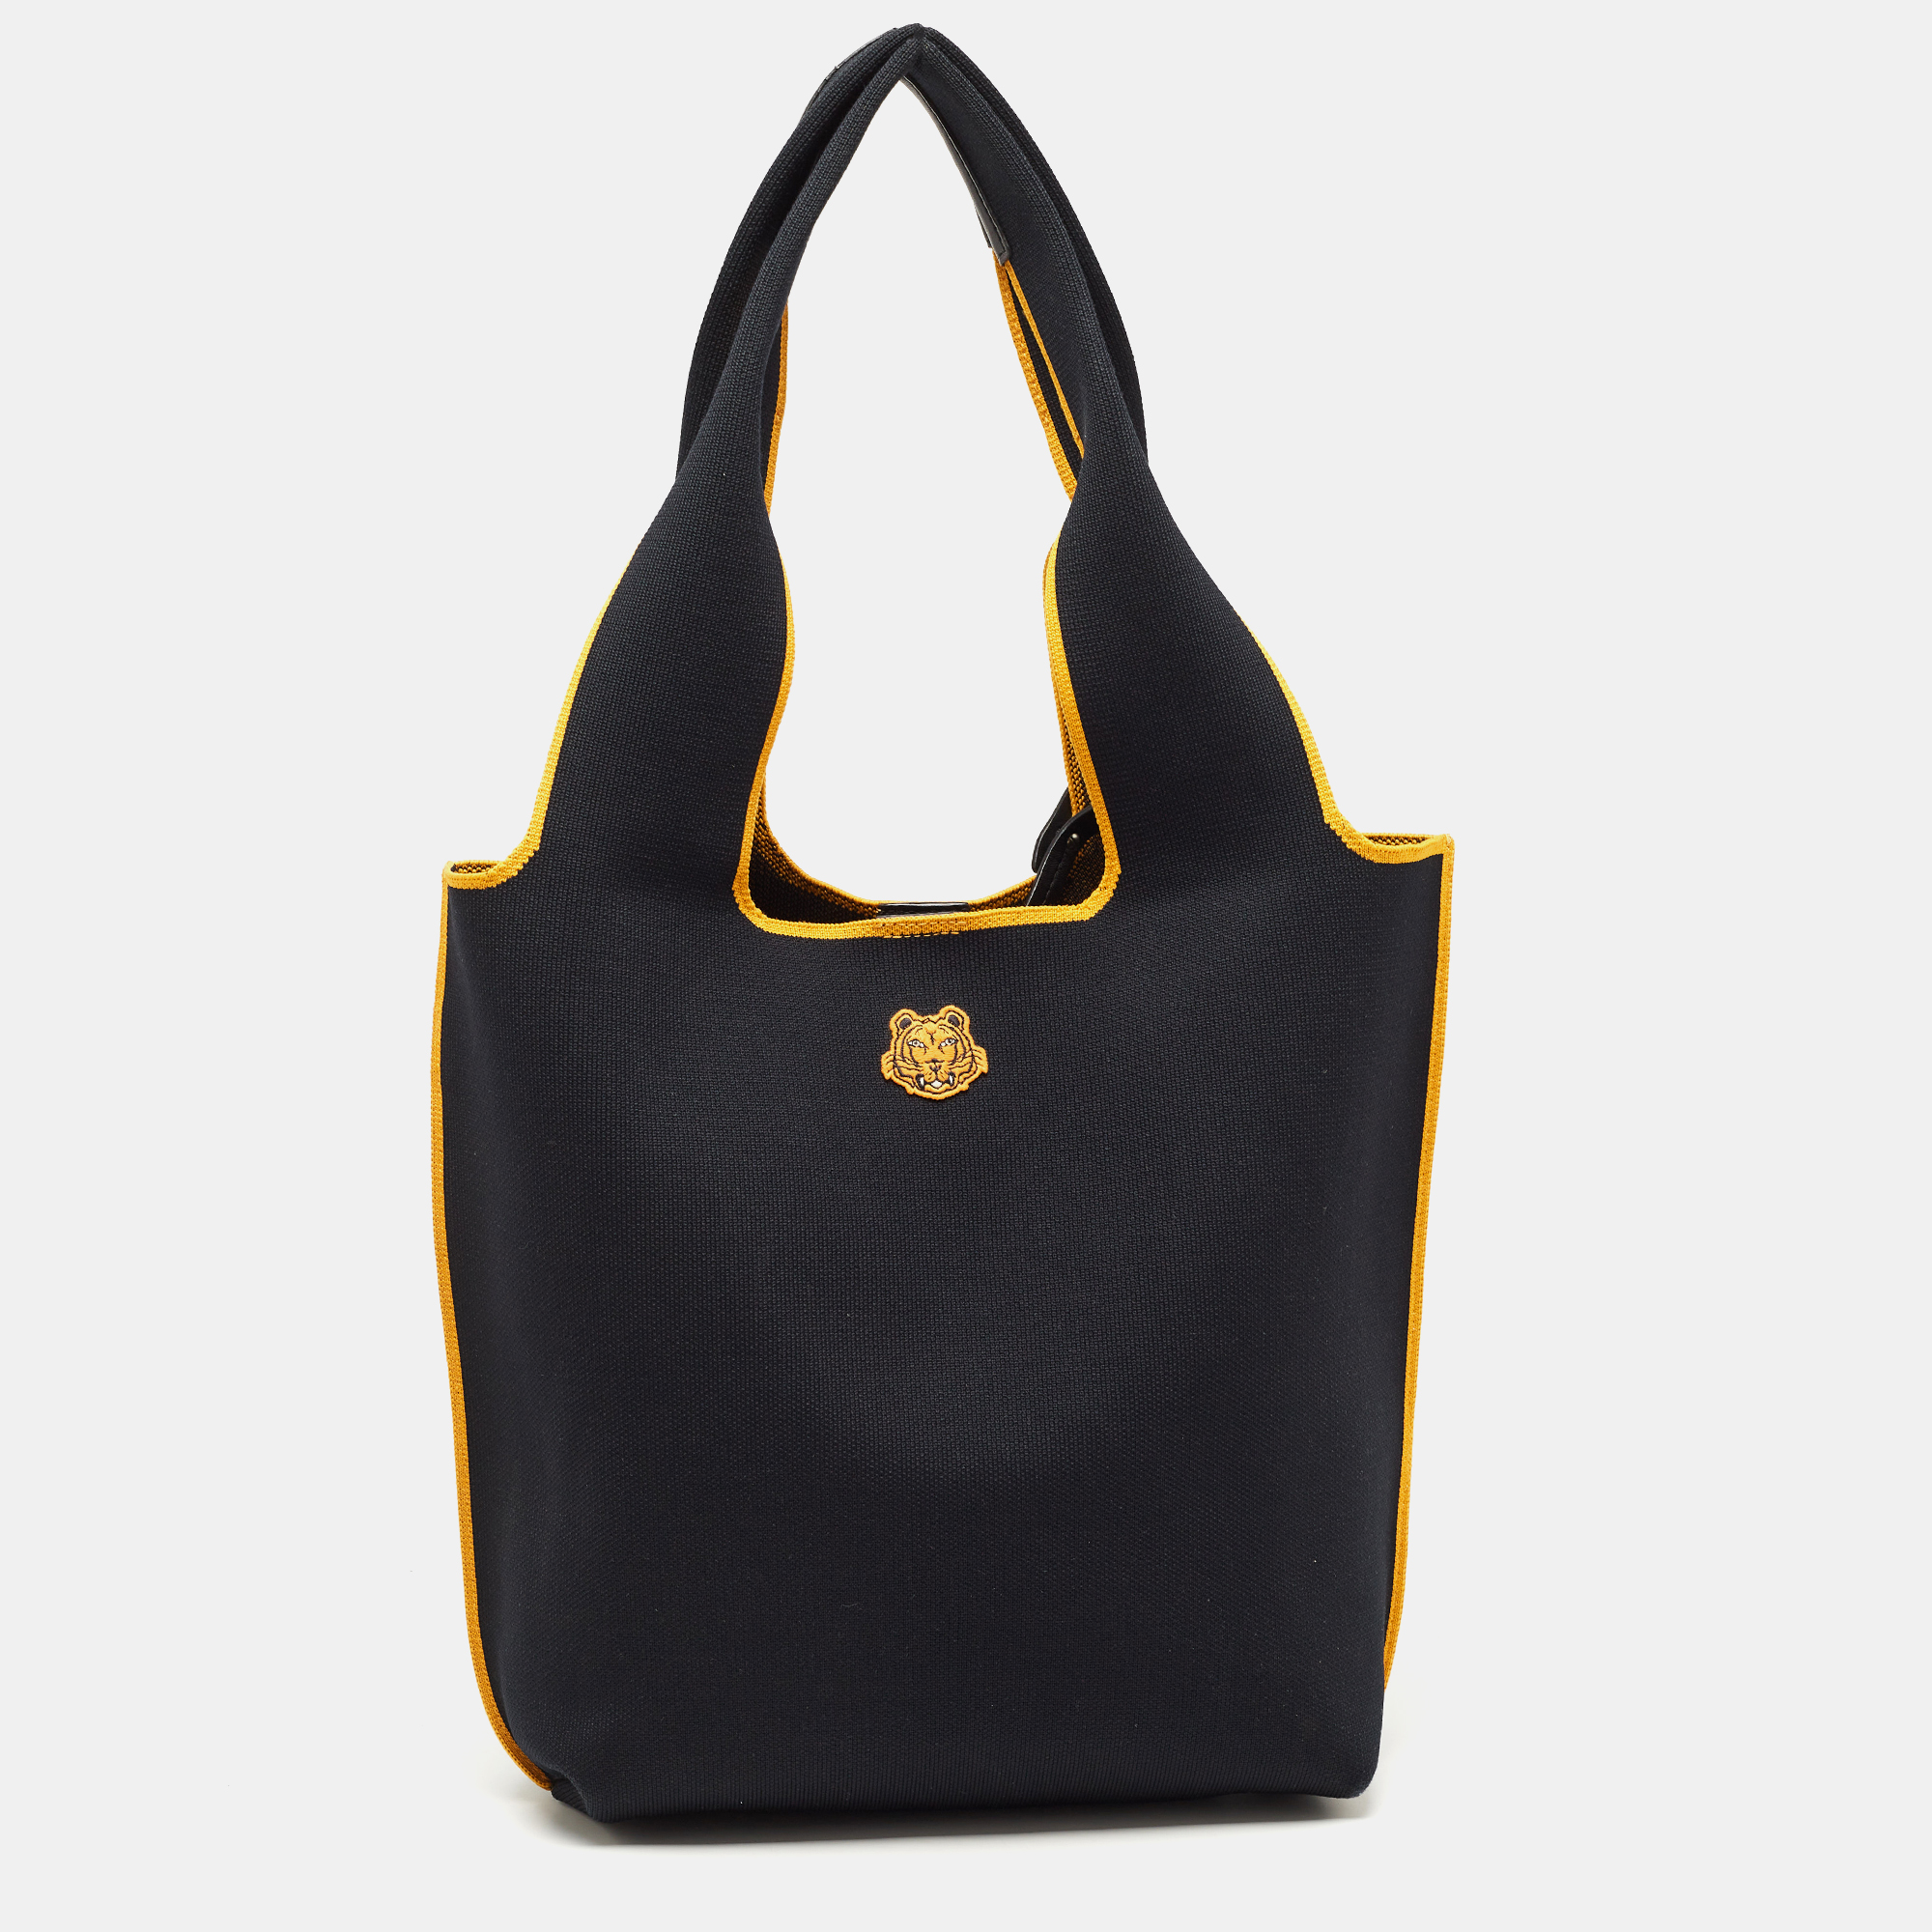 Kenzo Black/Yellow Canvas Contrasting Details Tote